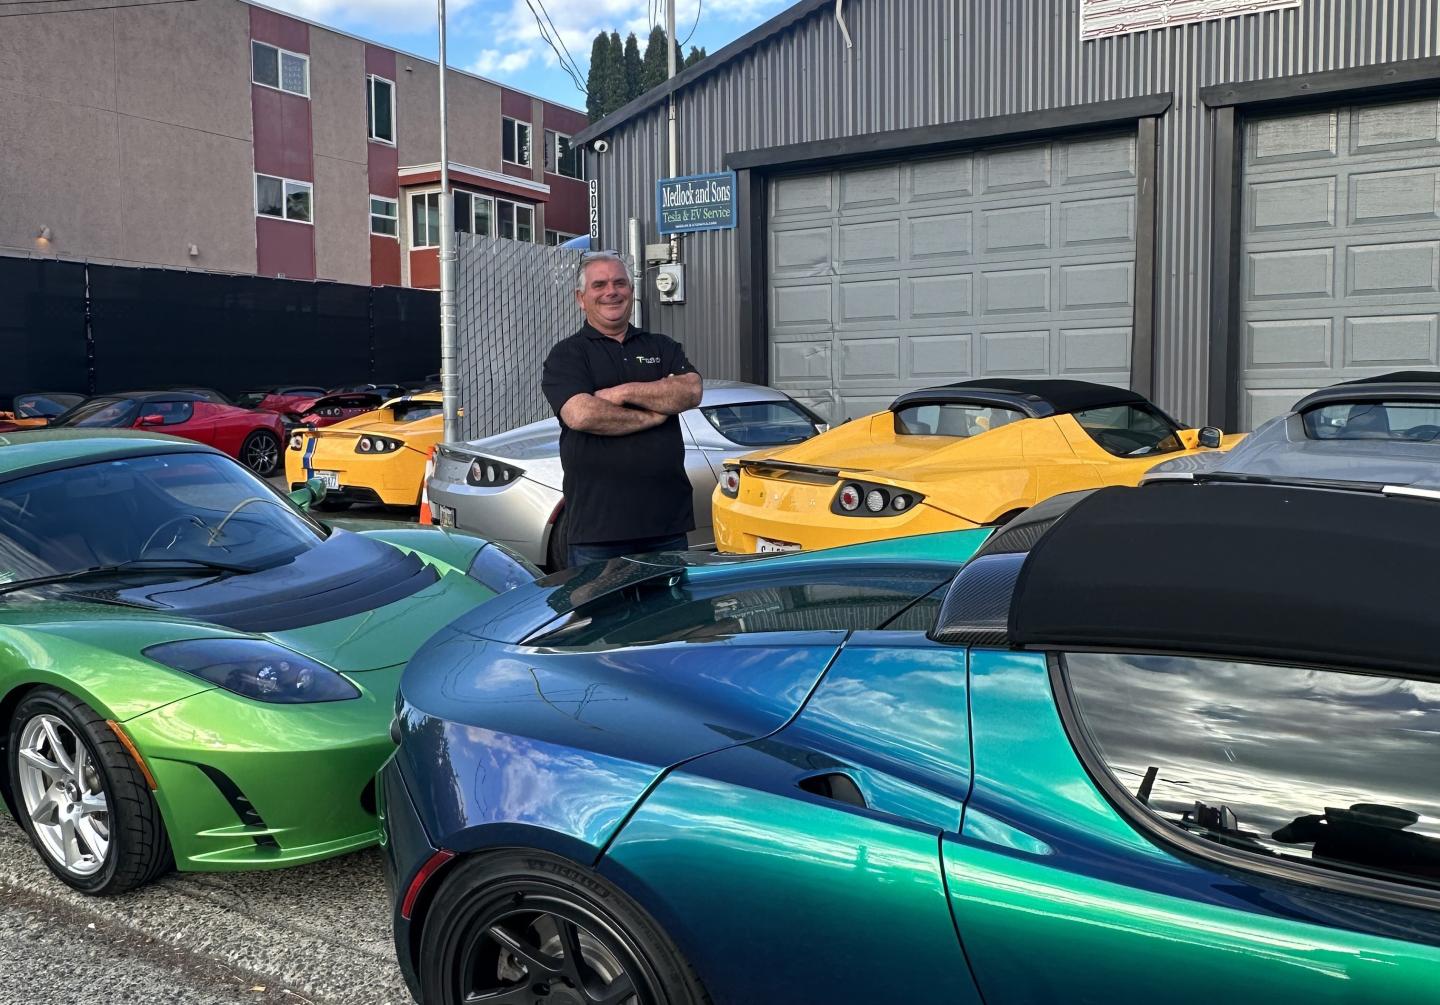 Carl Medlock standing in a row of electric vehicles